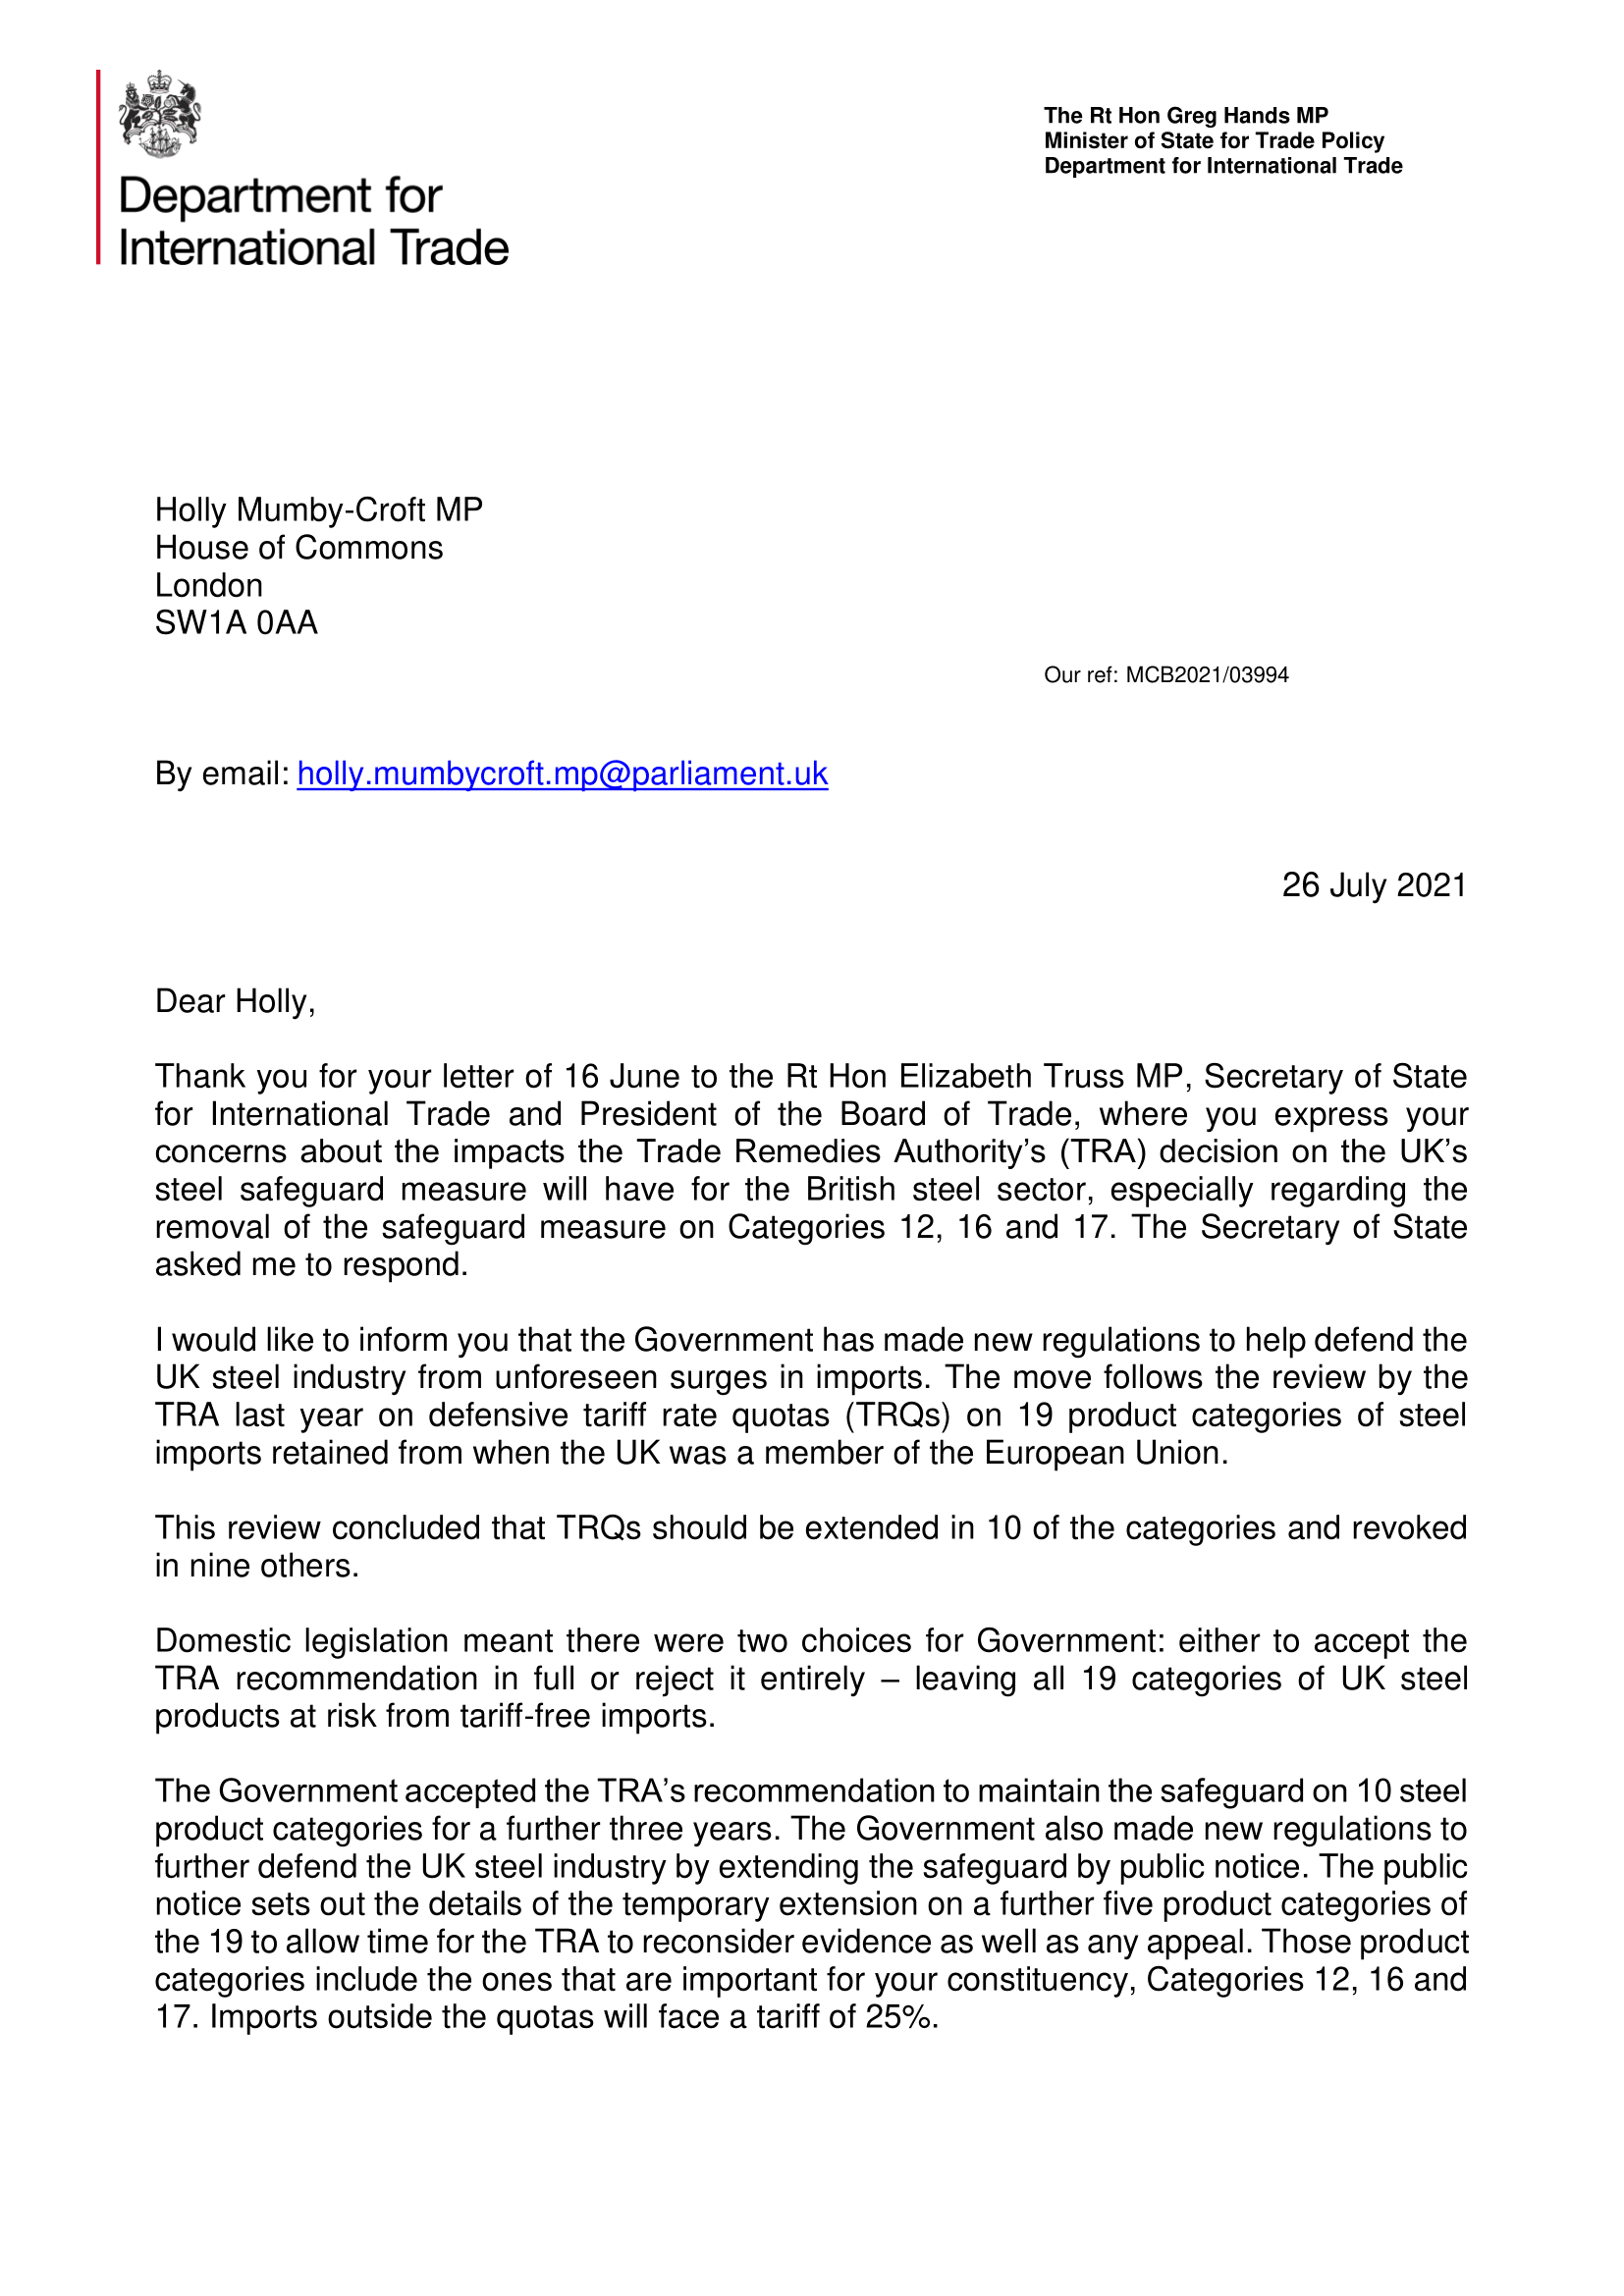 Letter from Trade Minister